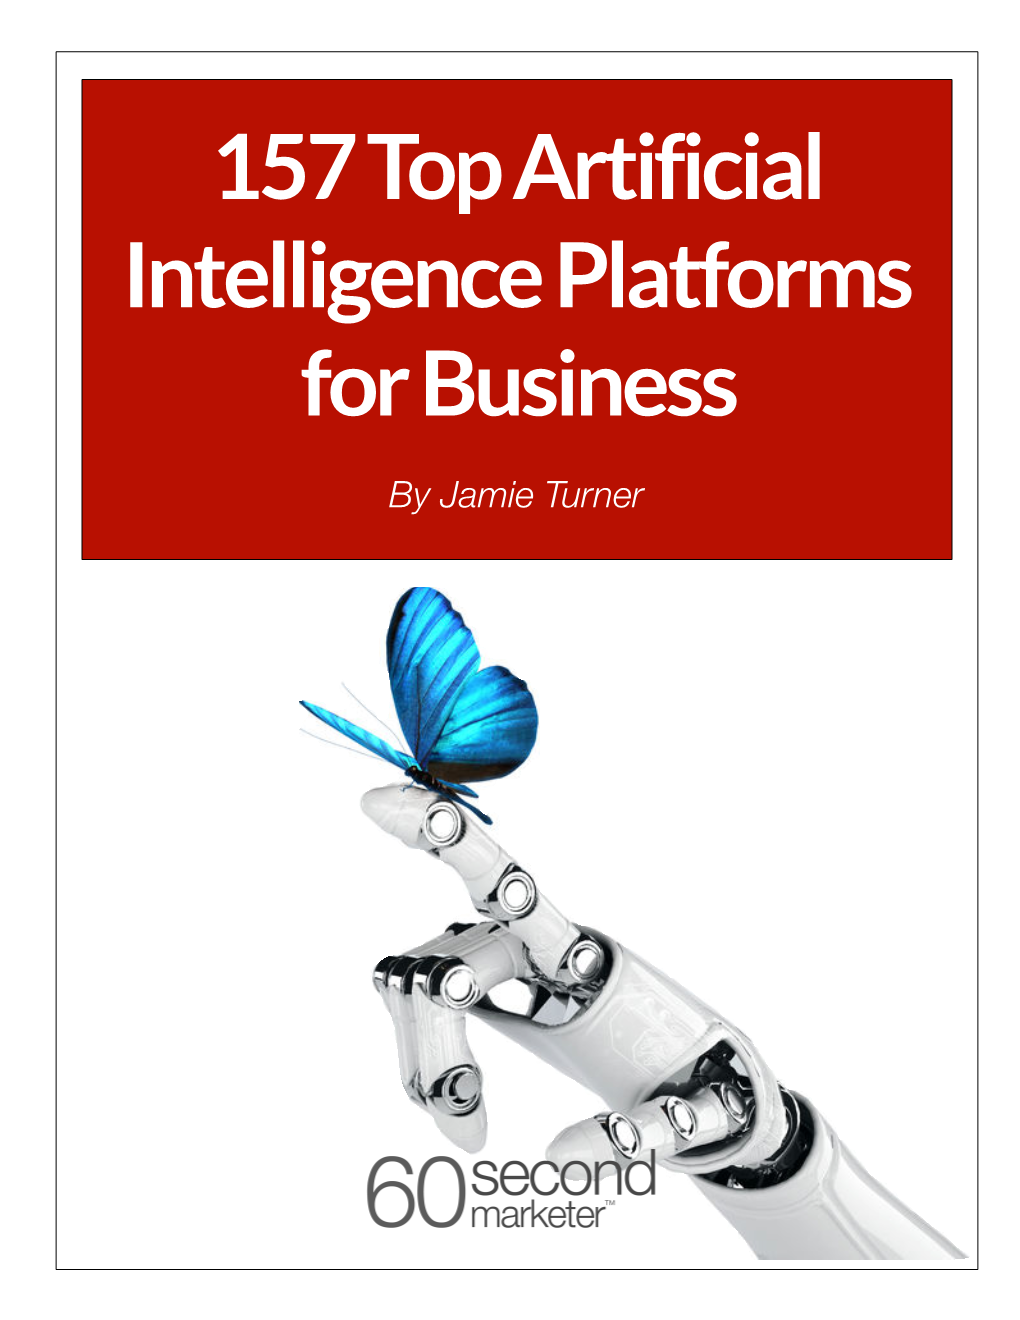 1.9.18. 100 Top Artificial Intelligence Platforms.Pages